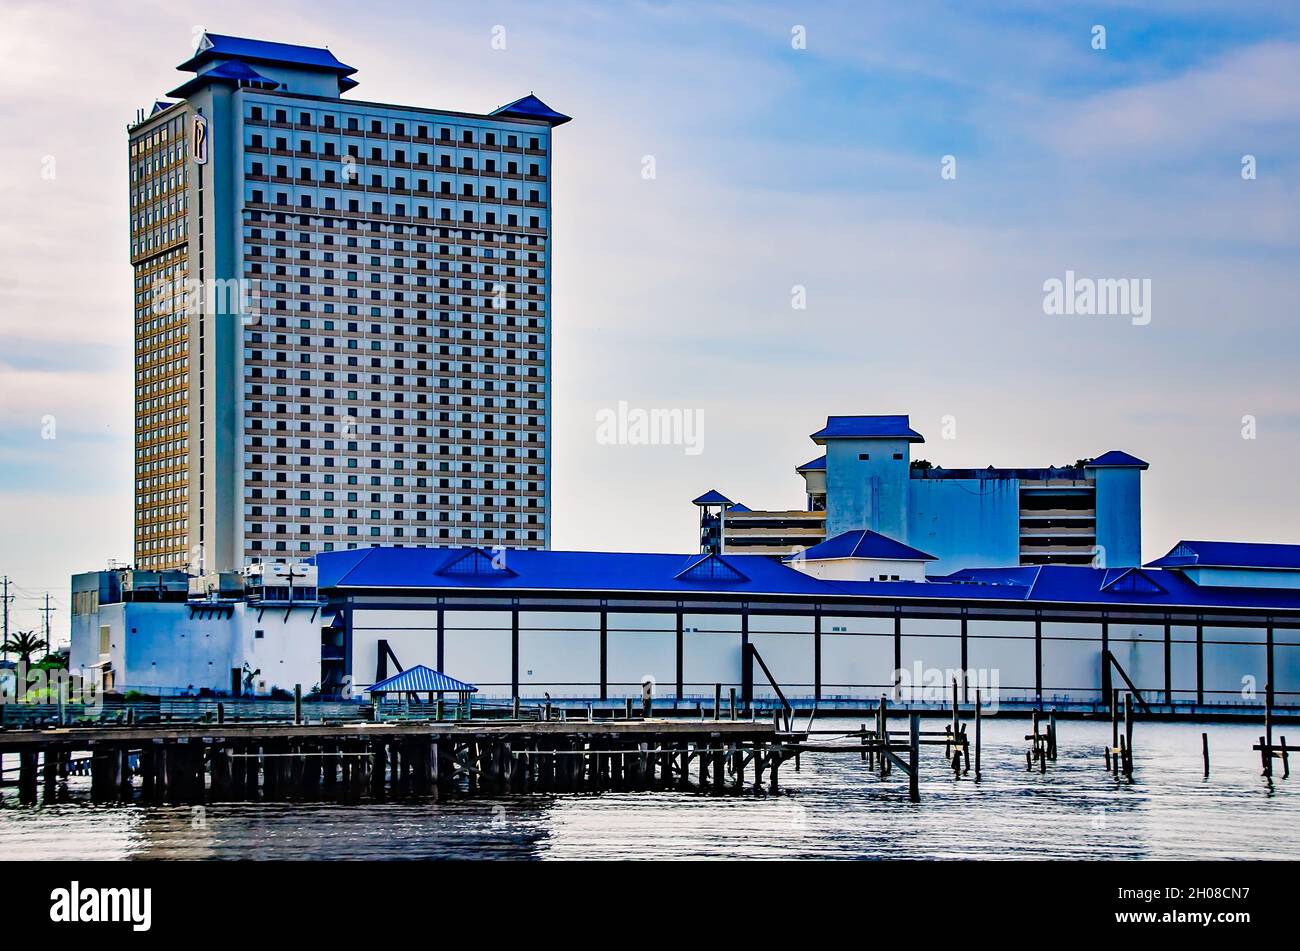 The IP Casino is pictured, Oct. 9, 2021, in Biloxi, Mississippi. IP Casino, located in Back Bay Biloxi, opened in 1997 as Imperial Palace. Stock Photo